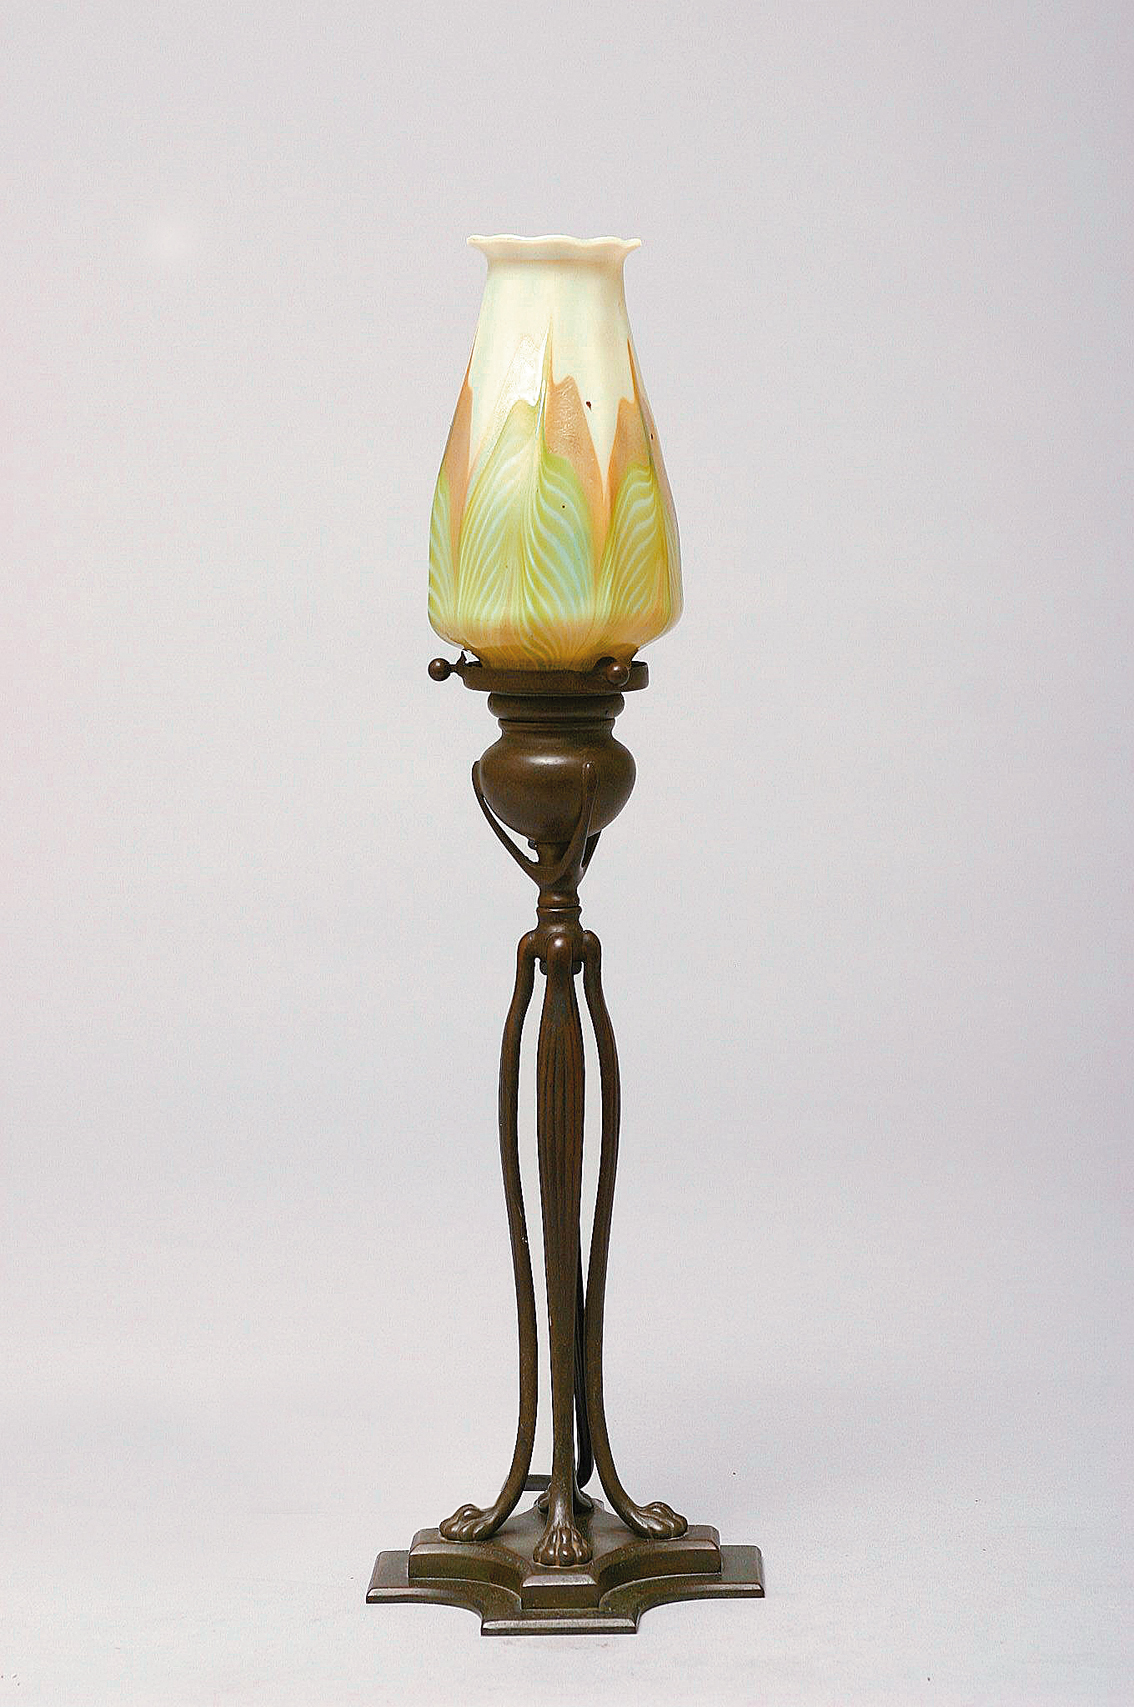 An original table lamp with feet of lions